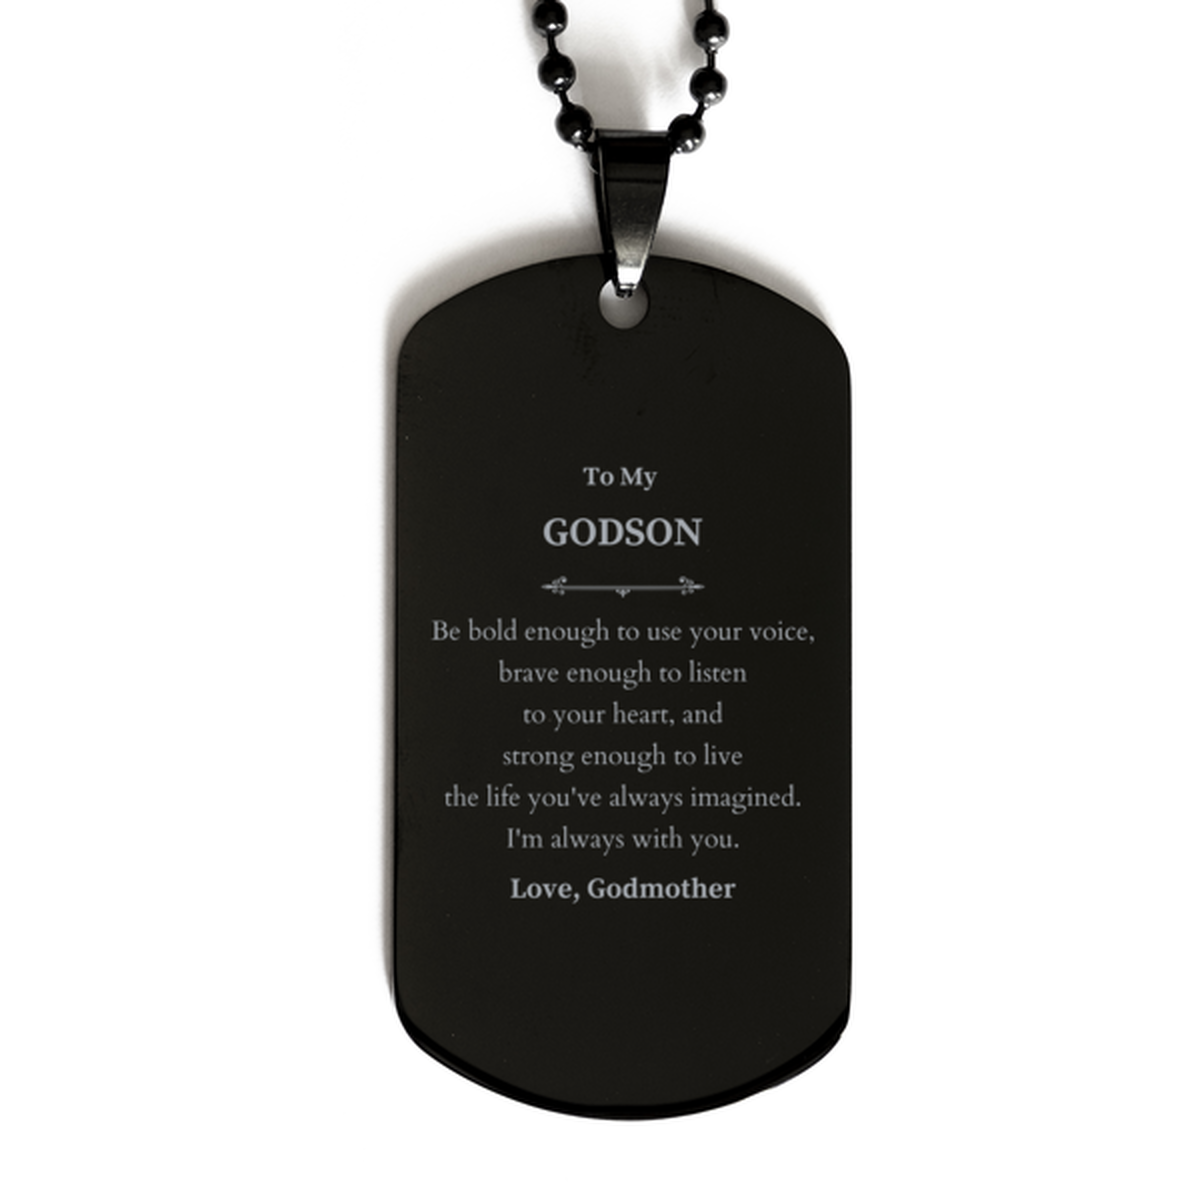 Keepsake Godson Black Dog Tag Gift Idea Graduation Christmas Birthday Godson from Godmother, Godson Be bold enough to use your voice, brave enough to listen to your heart. Love, Godmother